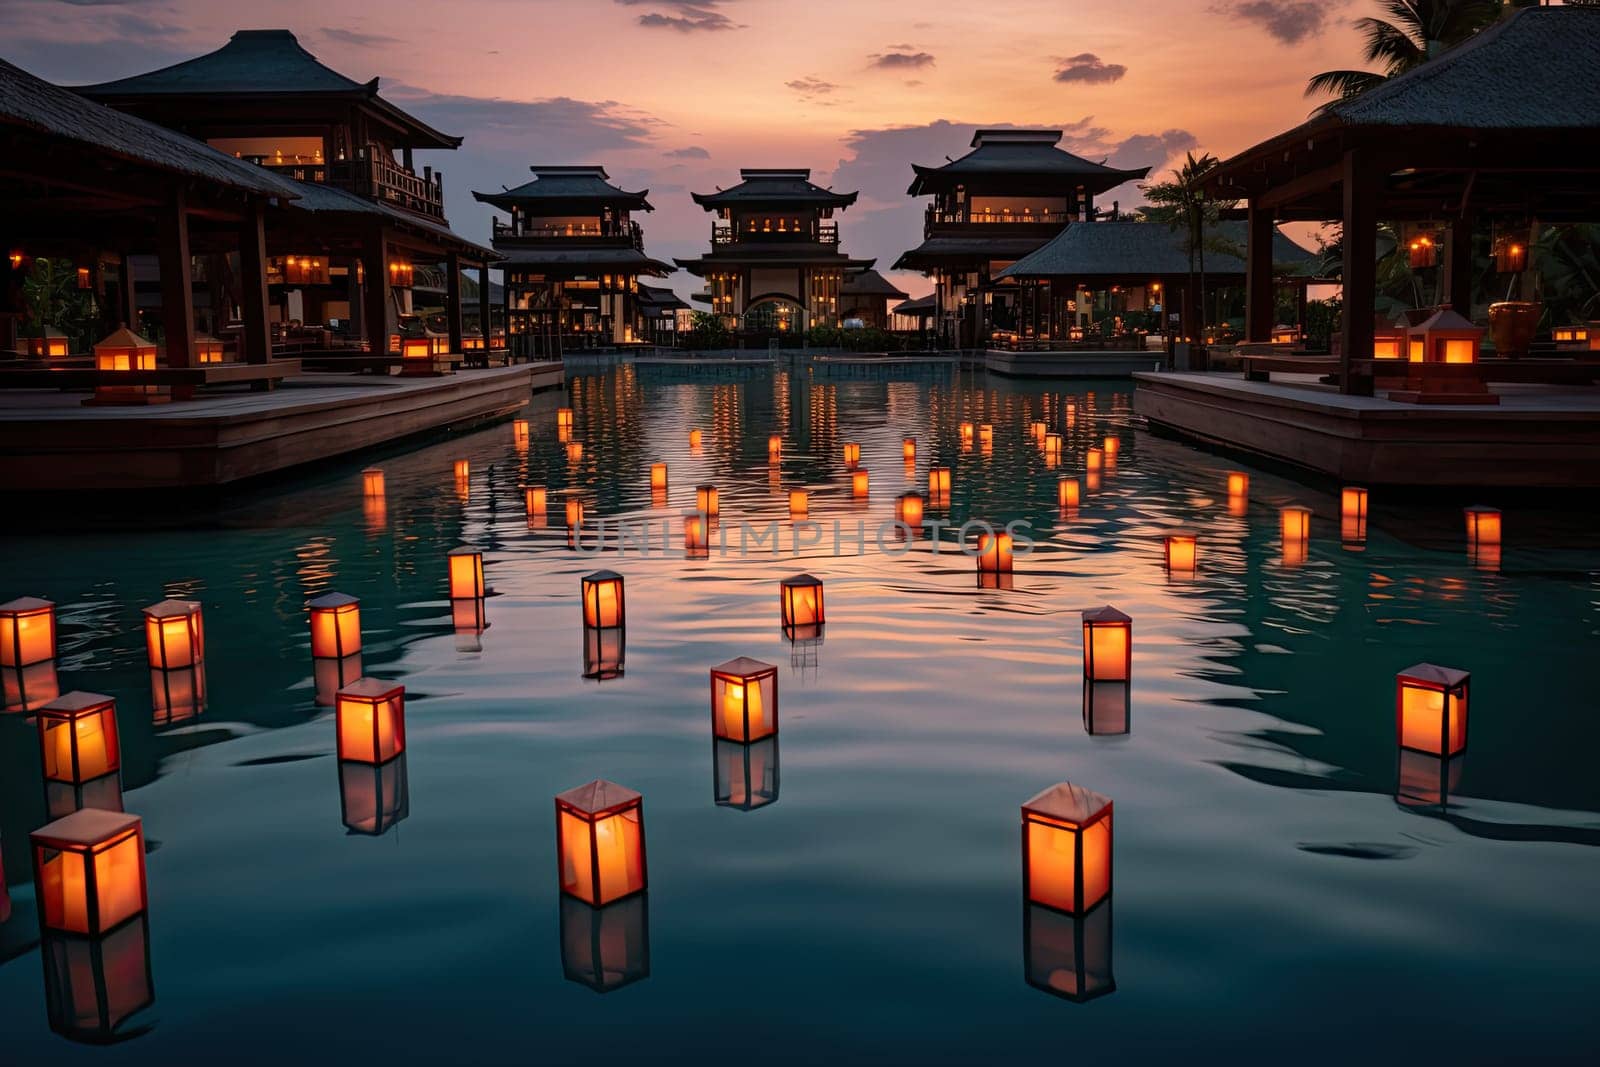 Many lanterns floating in the water at dusk by golibtolibov